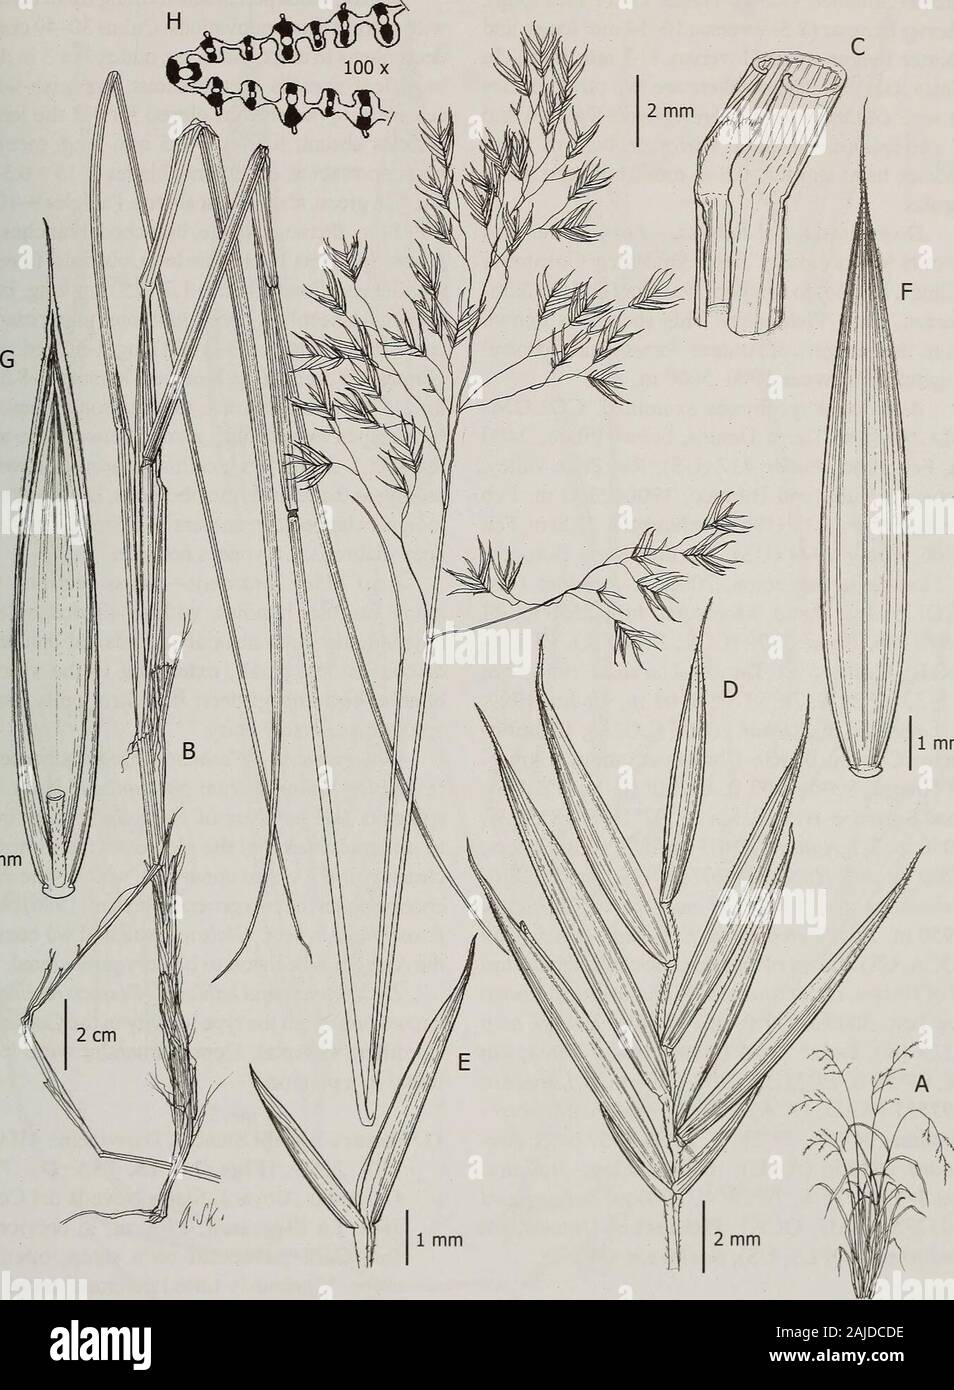 Contributions from the United States National Herbarium . sometimes spreading,scabrous. Spikelets 15-17 mm long, oval, florets5-7(-8); rachilla pilose; glumes 3.5-6.5 mm long,membranous, lanceolate, green with transparentmembranous margins; lower glumes 3.5—4(—5) mmlong, 1-nerved; upper glumes 4.5-6.5 mm long,3-nerved; lemmas 10-14 mm long, lanceolate,membranous to coriaceous, 5-nerved, green, sca-brous or shortly densely hairy, apex entire, awned,the awn 1-3 mm long; callus glabrous; paleas 4/5as long as the lemma, membranous, scabrous; lodi-cules 0.8-1 mm long, oblong-lanceolate; anthers(2.8 Stock Photo